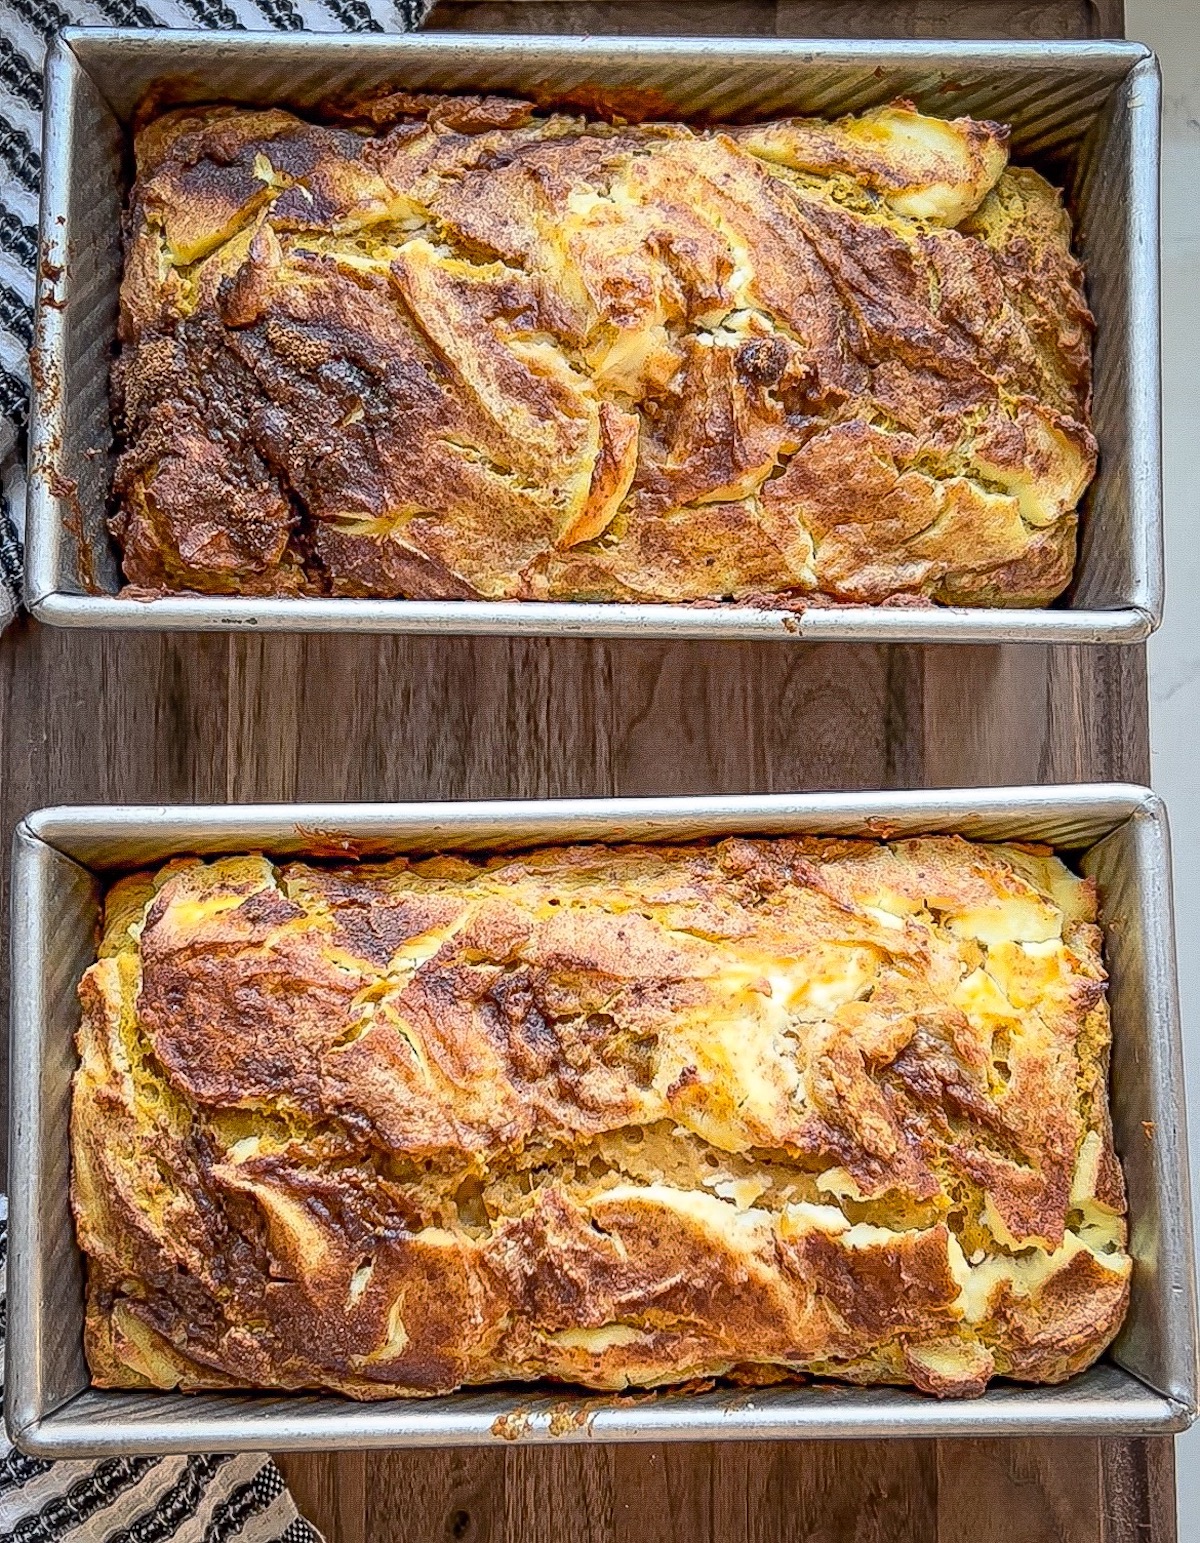 2 baked pumpkin loaves fresh from the oven, side-by-side